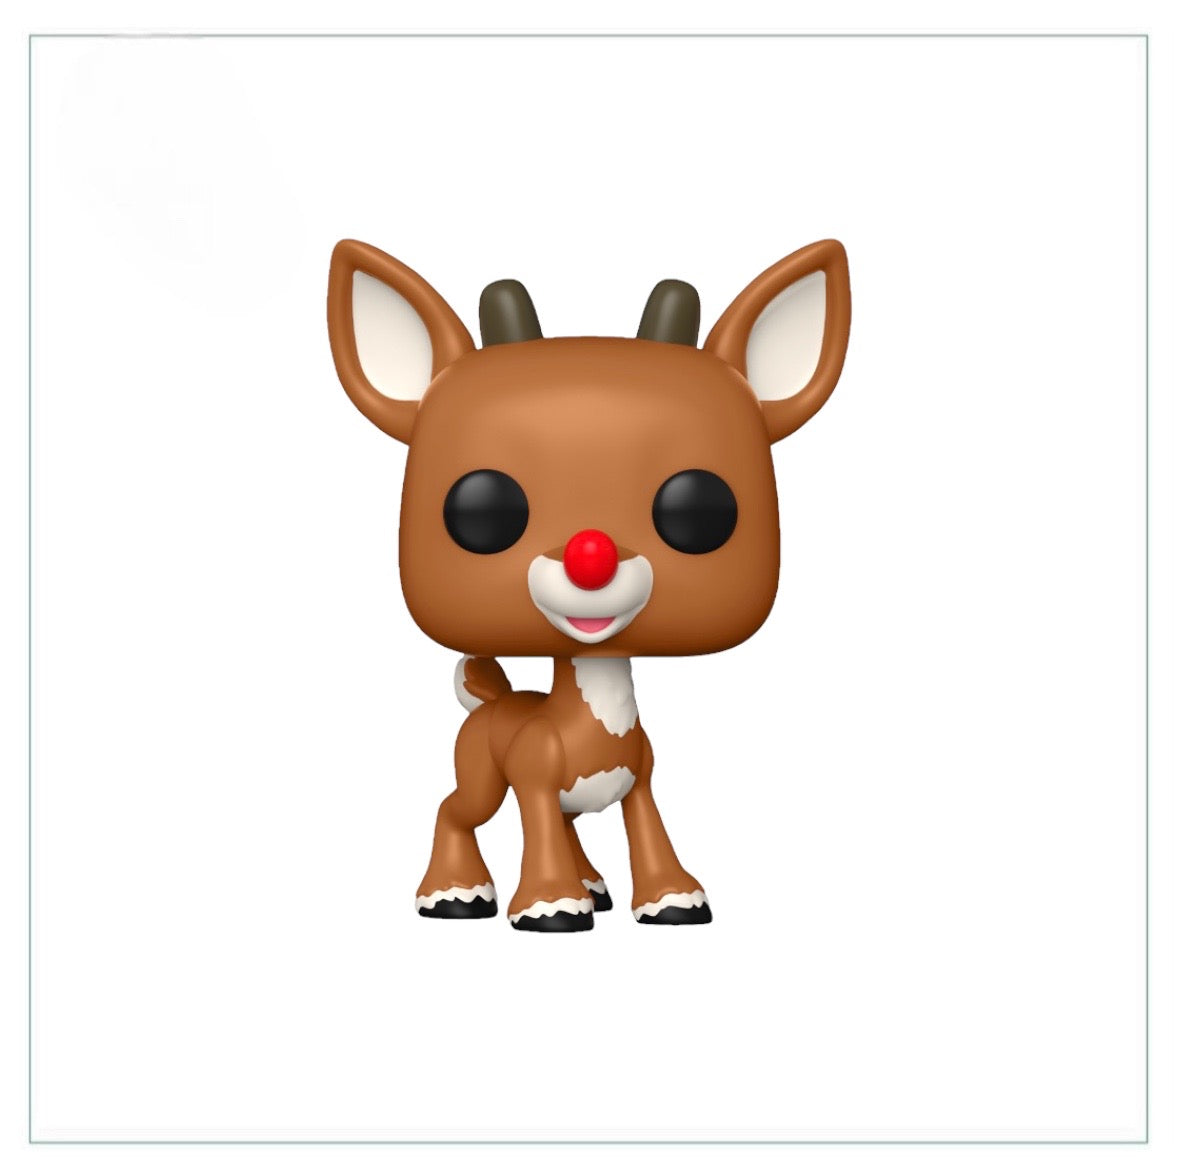 Rudolph #1260 Funko Pop! - Rudolph the Red-Nosed Reindeer